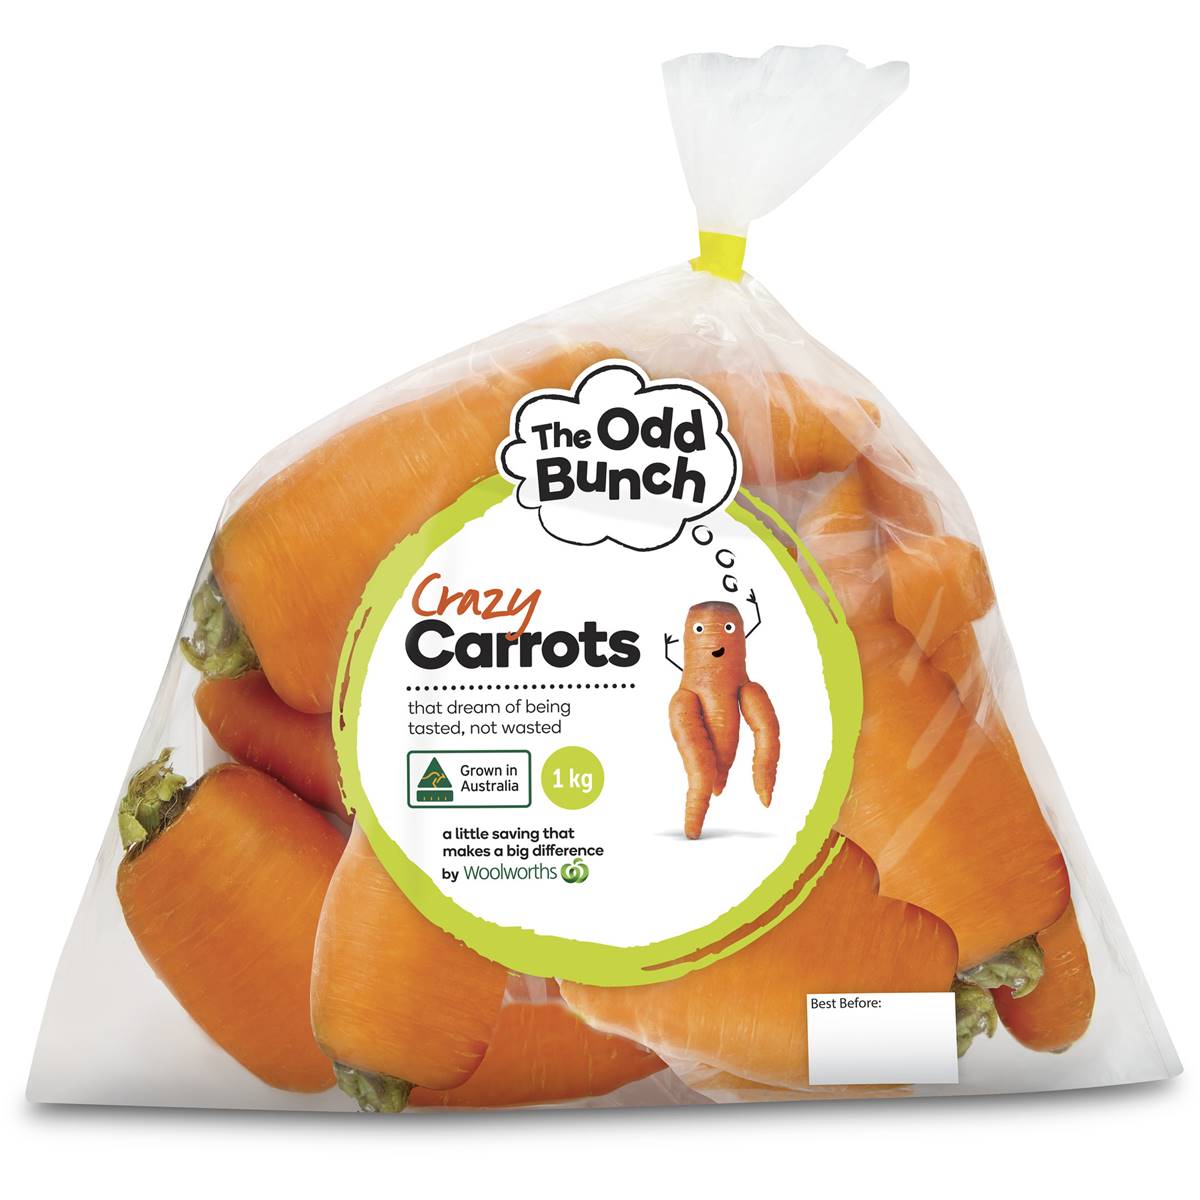 Calories in The Odd Bunch Carrot Prepacked